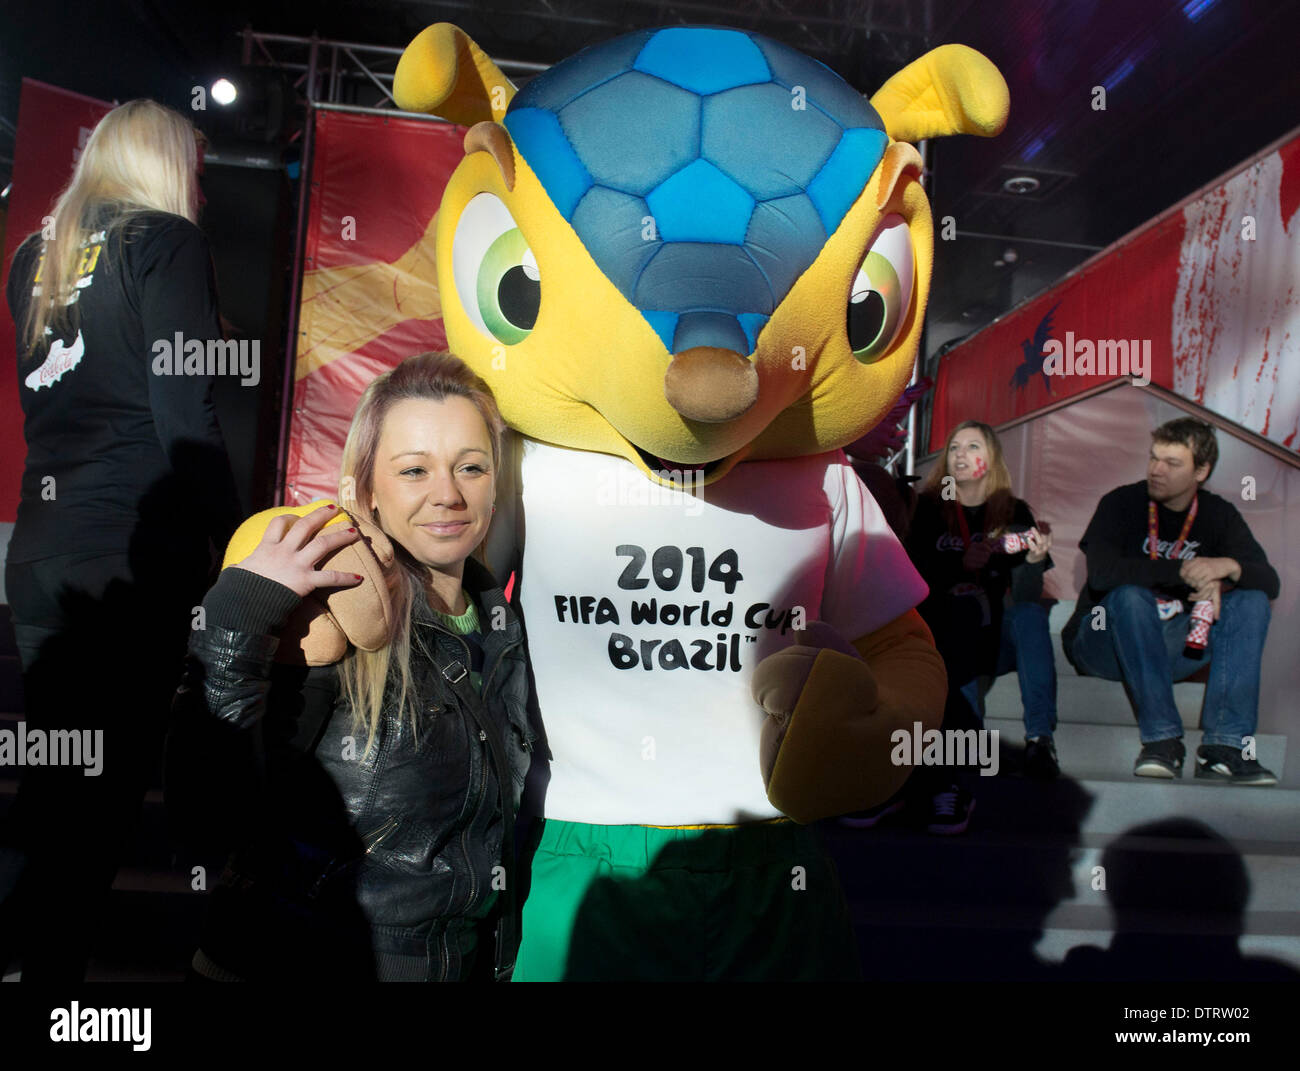 Zagreb, Croatia. 23rd Feb, 2014. A woman poses for a photo with Fuleco, the official mascot of the 2014 FIFA World Cup Brazil, during the FIFA World Cup trophy presentation in Zagreb, capital of Croatia, Feb. 23, 2014. The FIFA World Cup Trophy tour began its journey in September 2013 and will end in April 2014 in Brazil. © Miso Lisanin/Xinhua/Alamy Live News Stock Photo